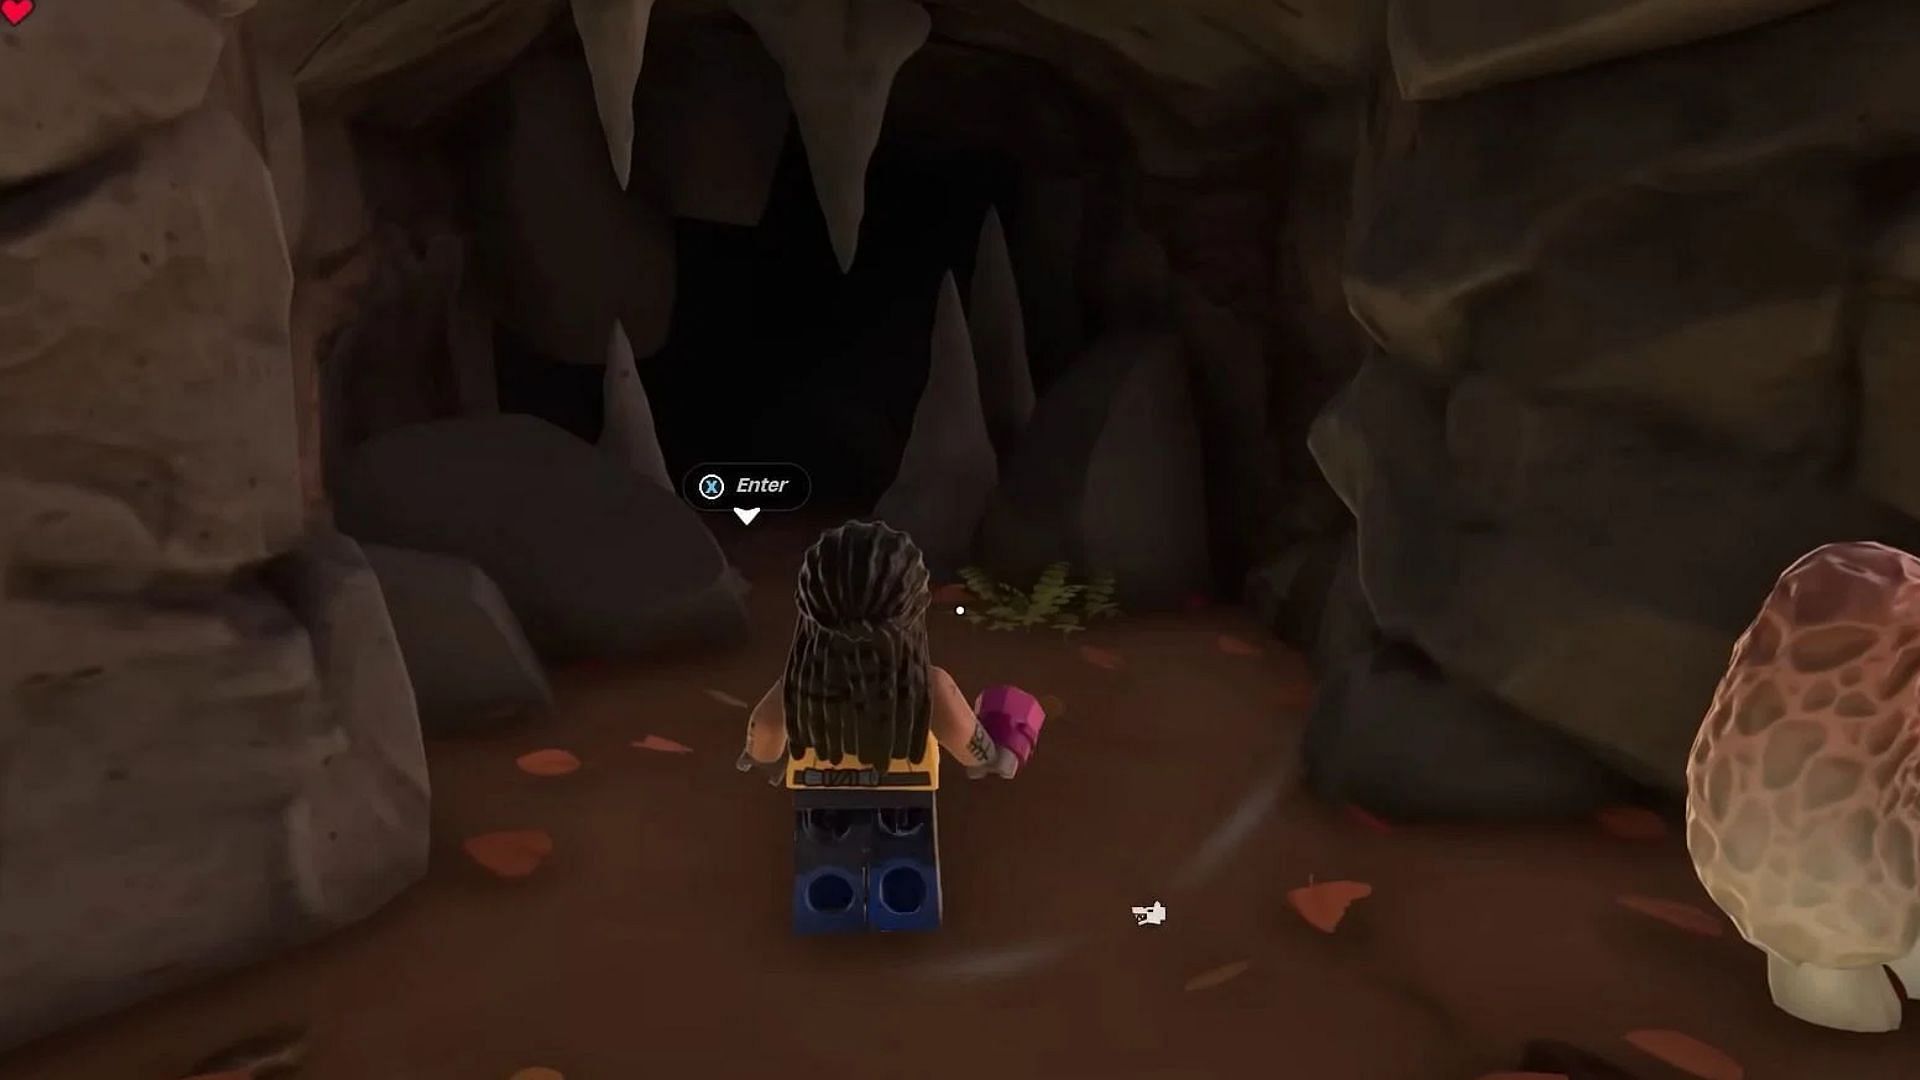 Entering Caves (Image via Epic Games/Perfect Score on YouTube)